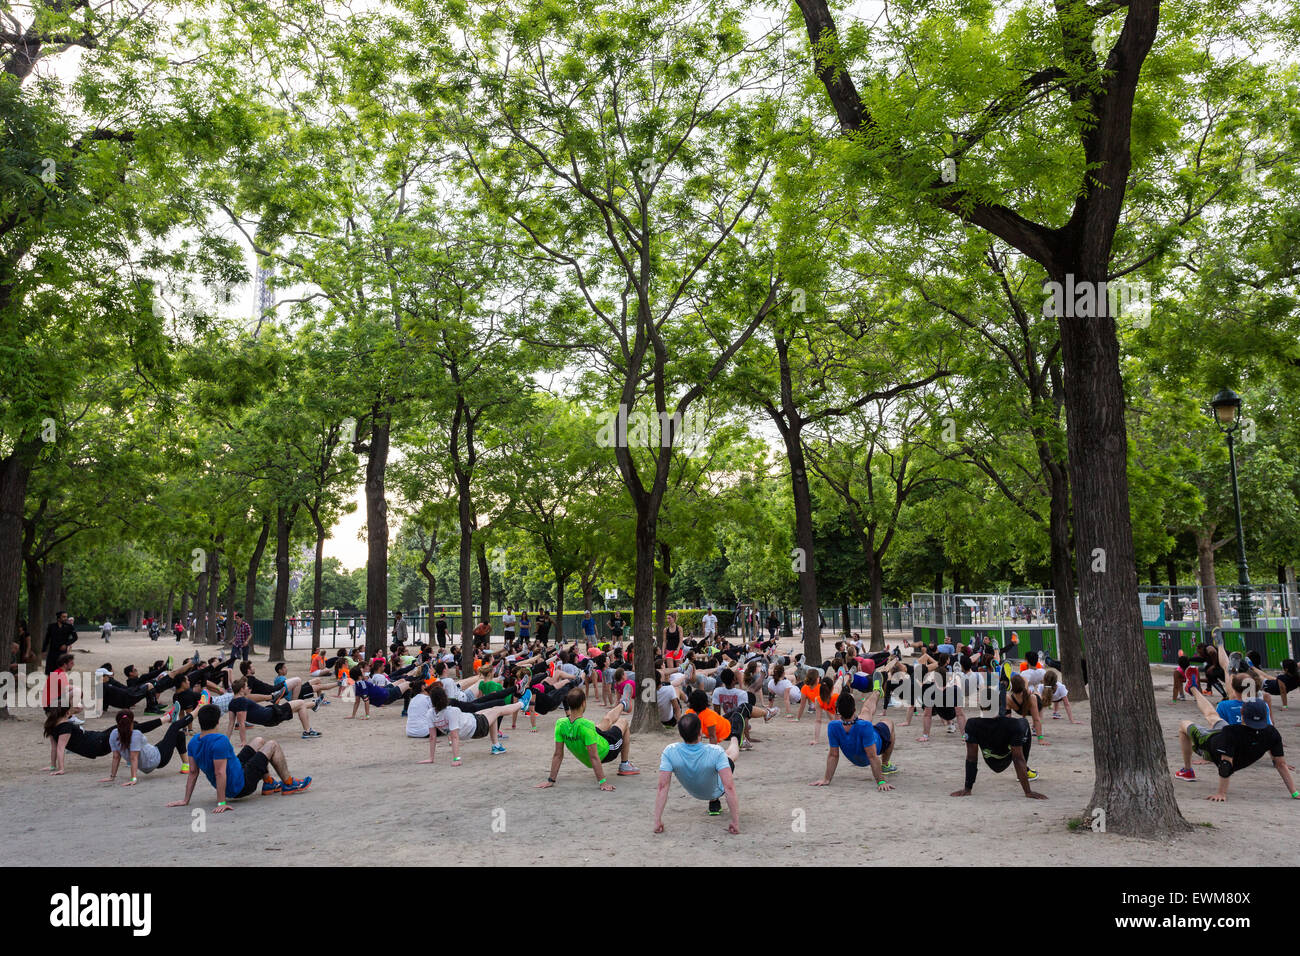 A large exercise class is held in the Champ de Mars park near the Eiffel Tower in Paris. Stock Photo